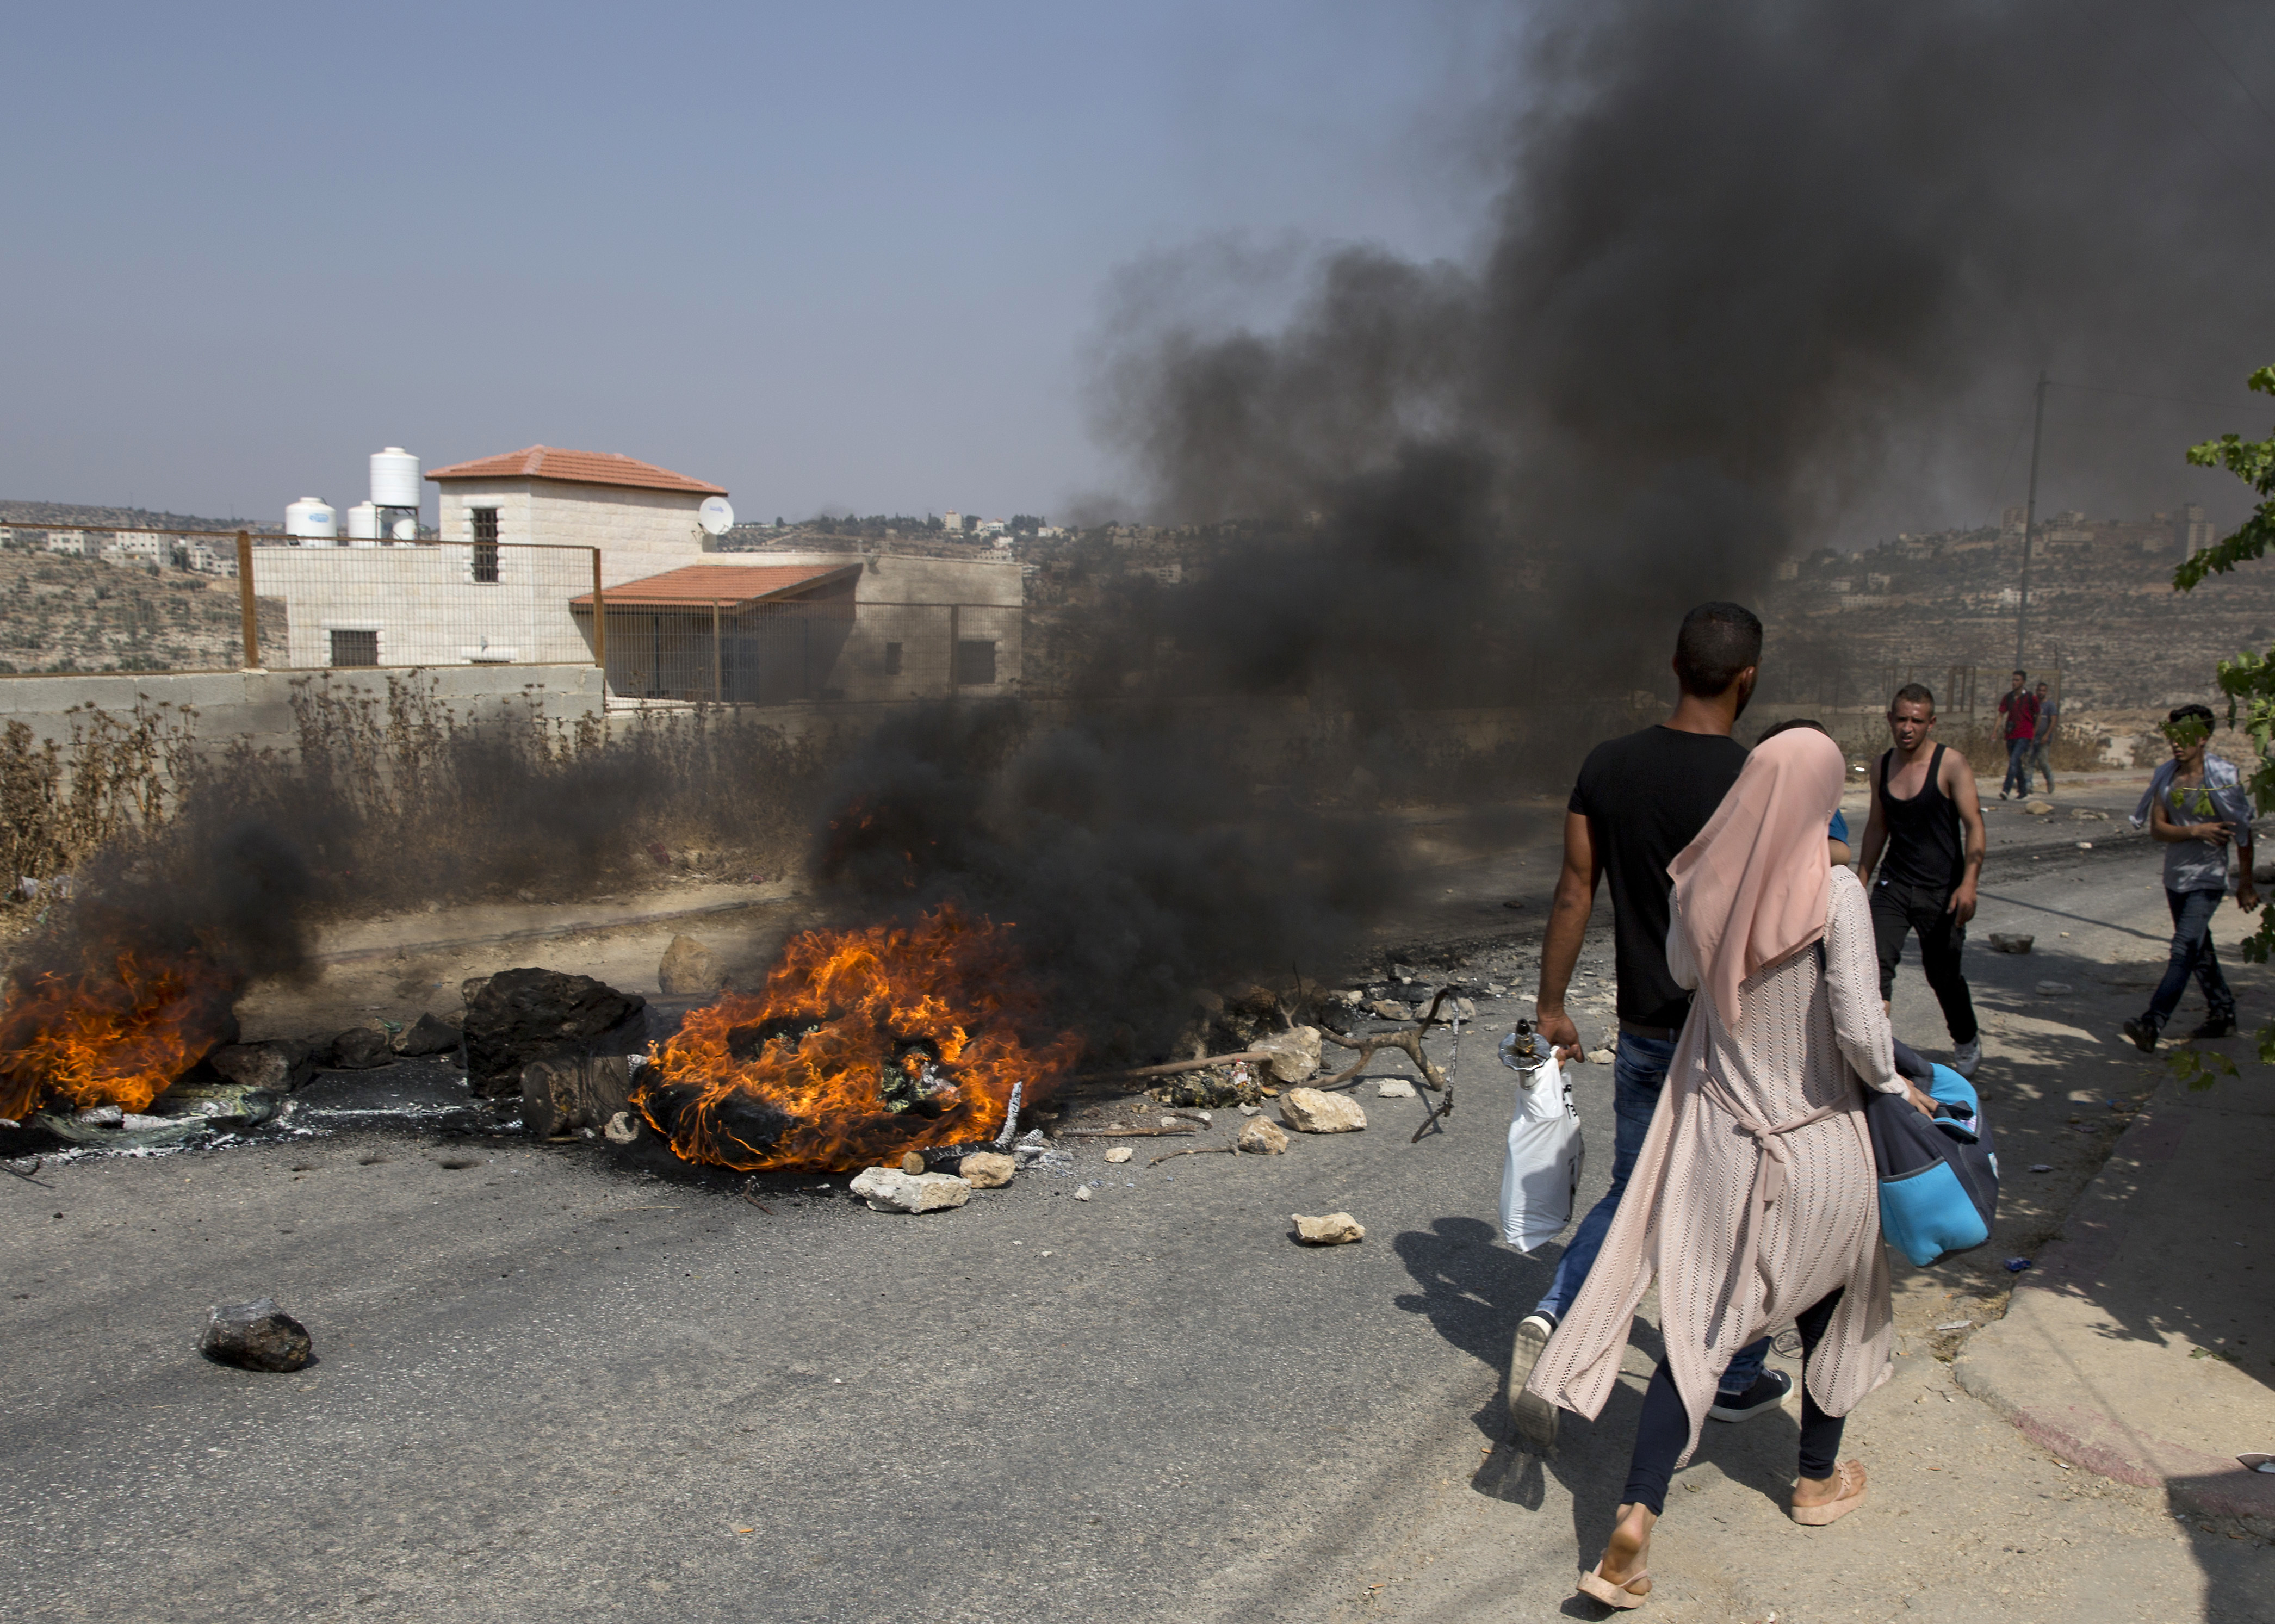 Palestinian protesters burn tires and clash with Israeli army soldiers after troops searched and measured the family house of Omar al-Abed, 20, identified by the Israeli army as the assailant of yesterday's attack at the Israeli settlement of Halamish, in preparation for demolition, in the West Bank village of Kobar, near Ramallah, Saturday, July 22, 2017. Israel's military sent more troops to the West Bank and placed forces on high alert Saturday, a day after a Palestinian stabbed to death three members of an Israeli family. (AP Photo/Nasser Nasser)